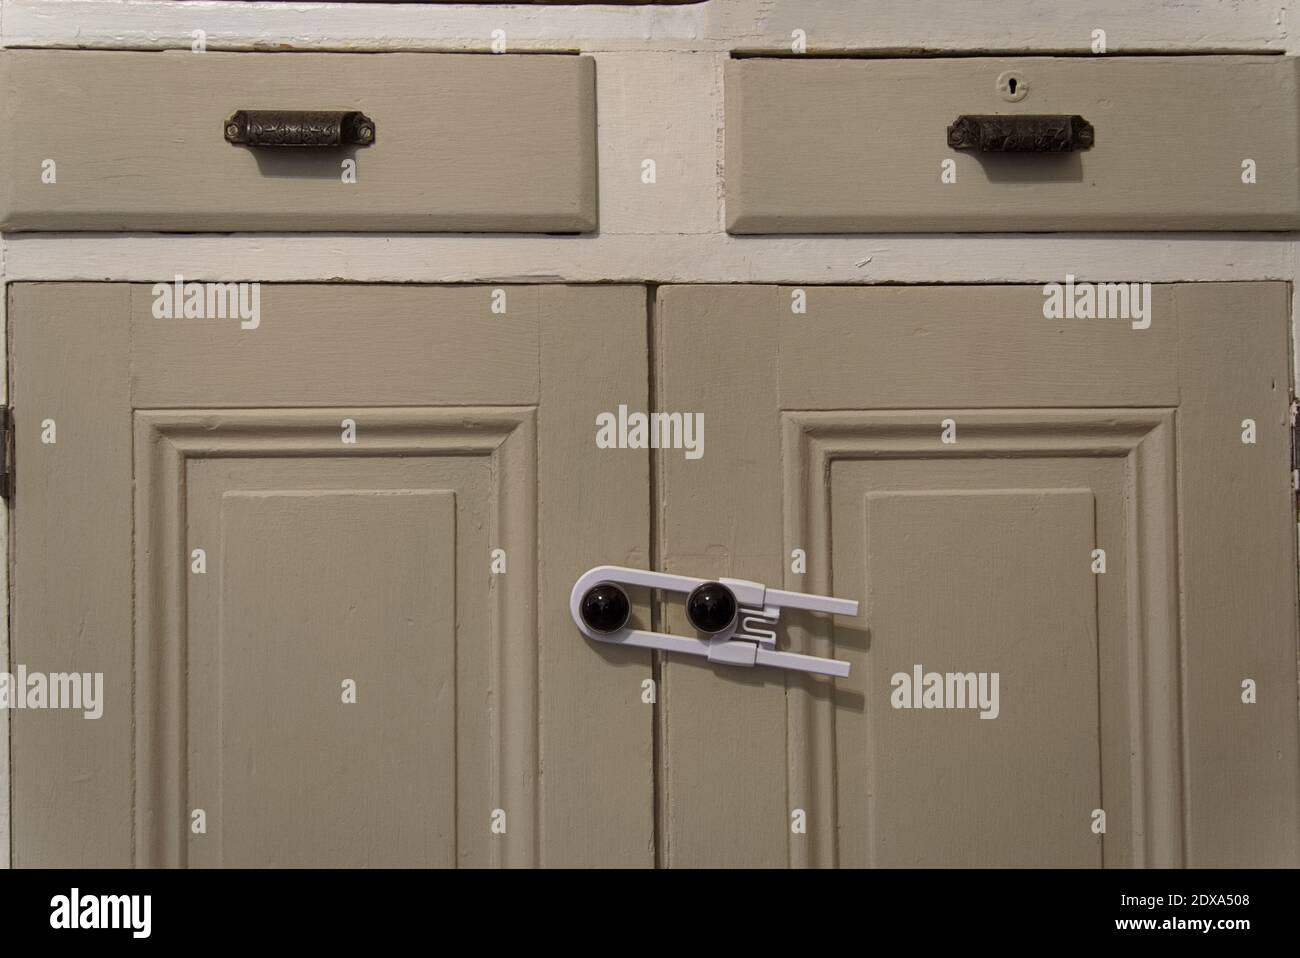 A child or baby safety locking device, holding the handles of two doors of a cabinet closed. Stock Photo